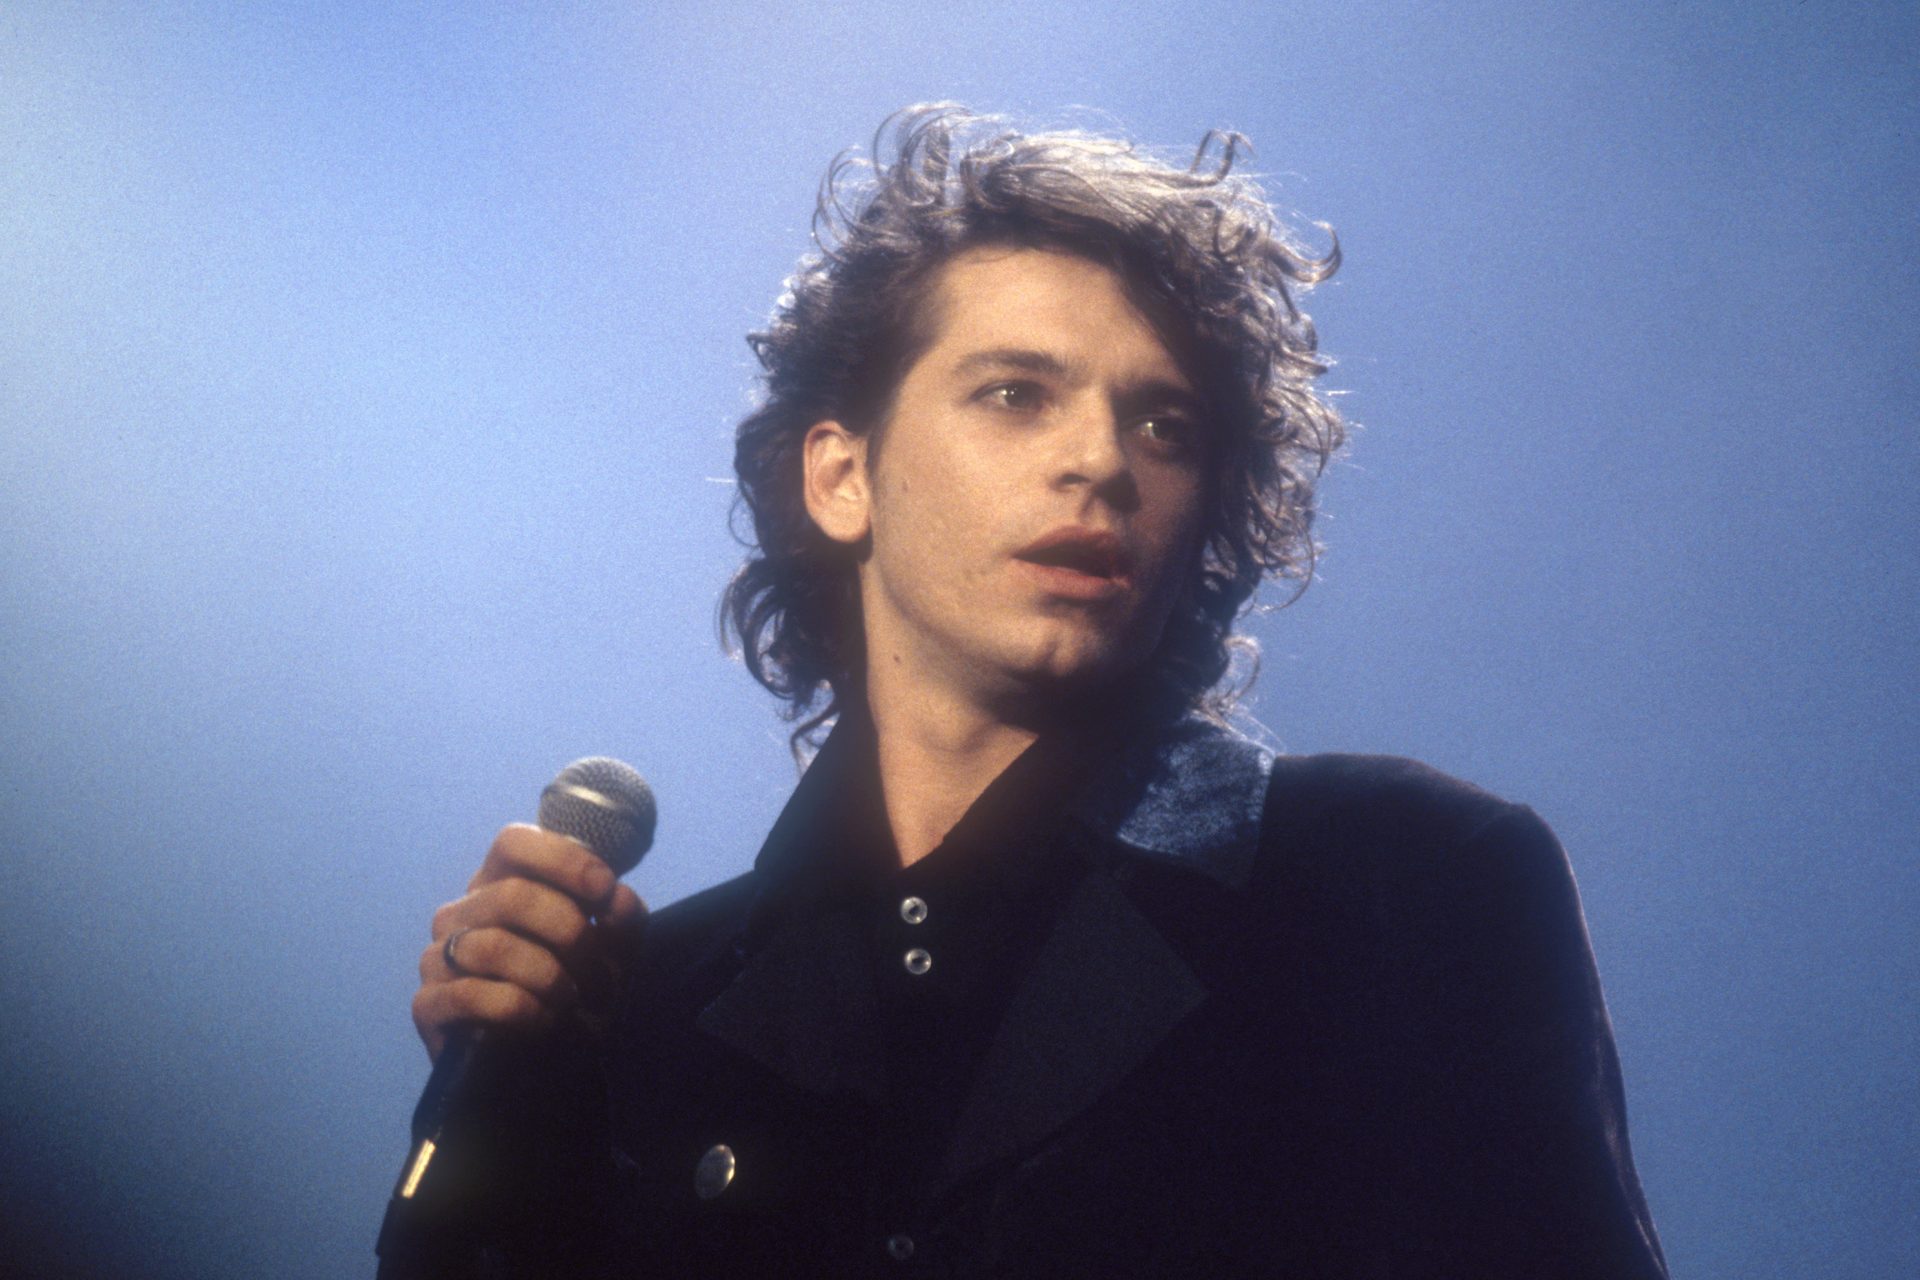 Michael Hutchence: the tragic story of the INXS rock star